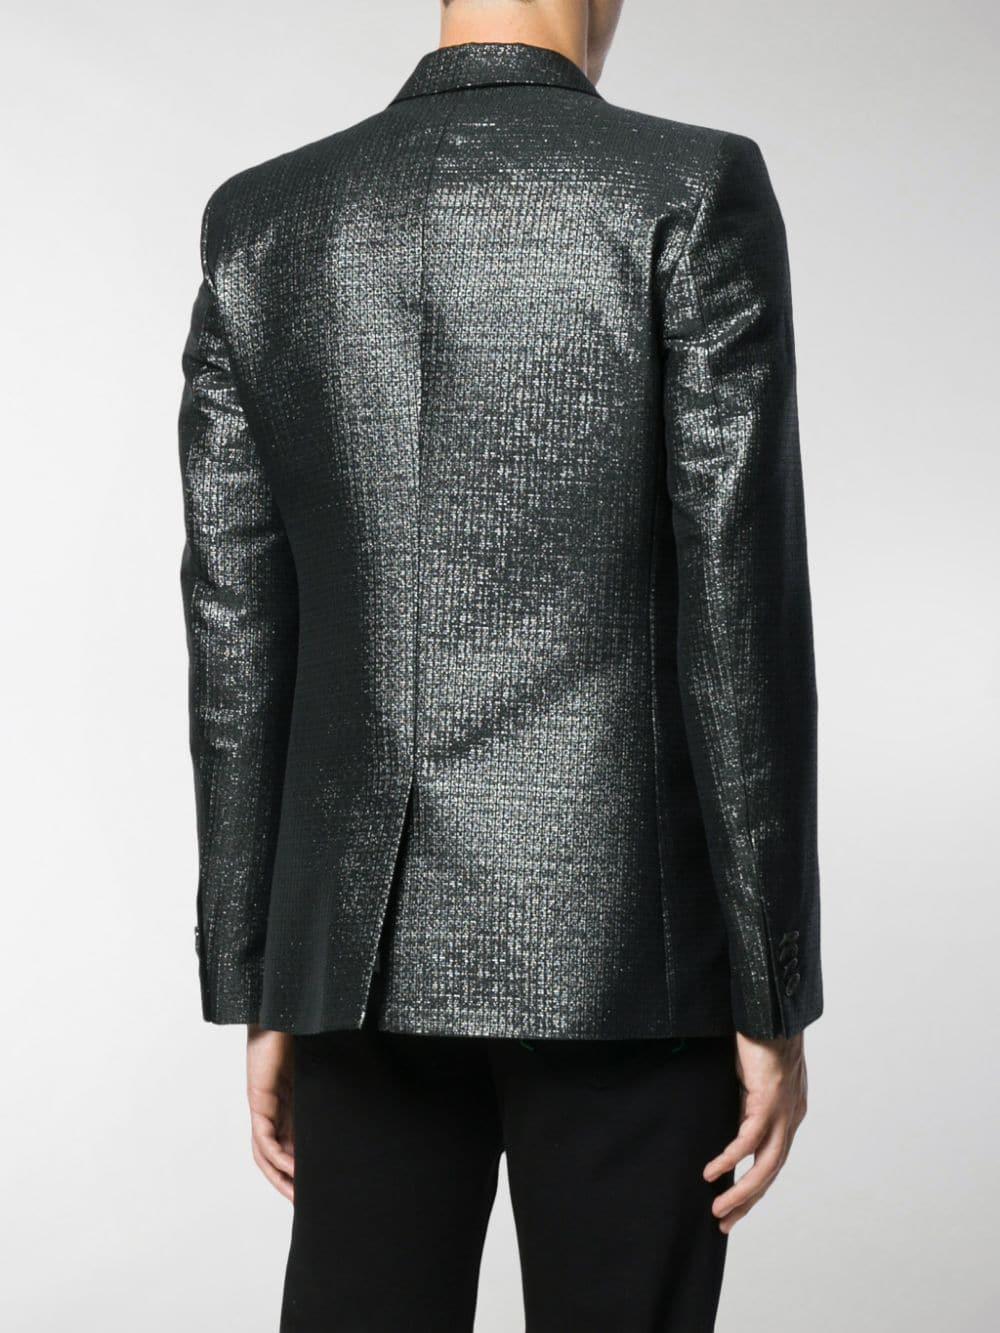 Givenchy Fitted Smoking Blazer in Black for Men - Lyst